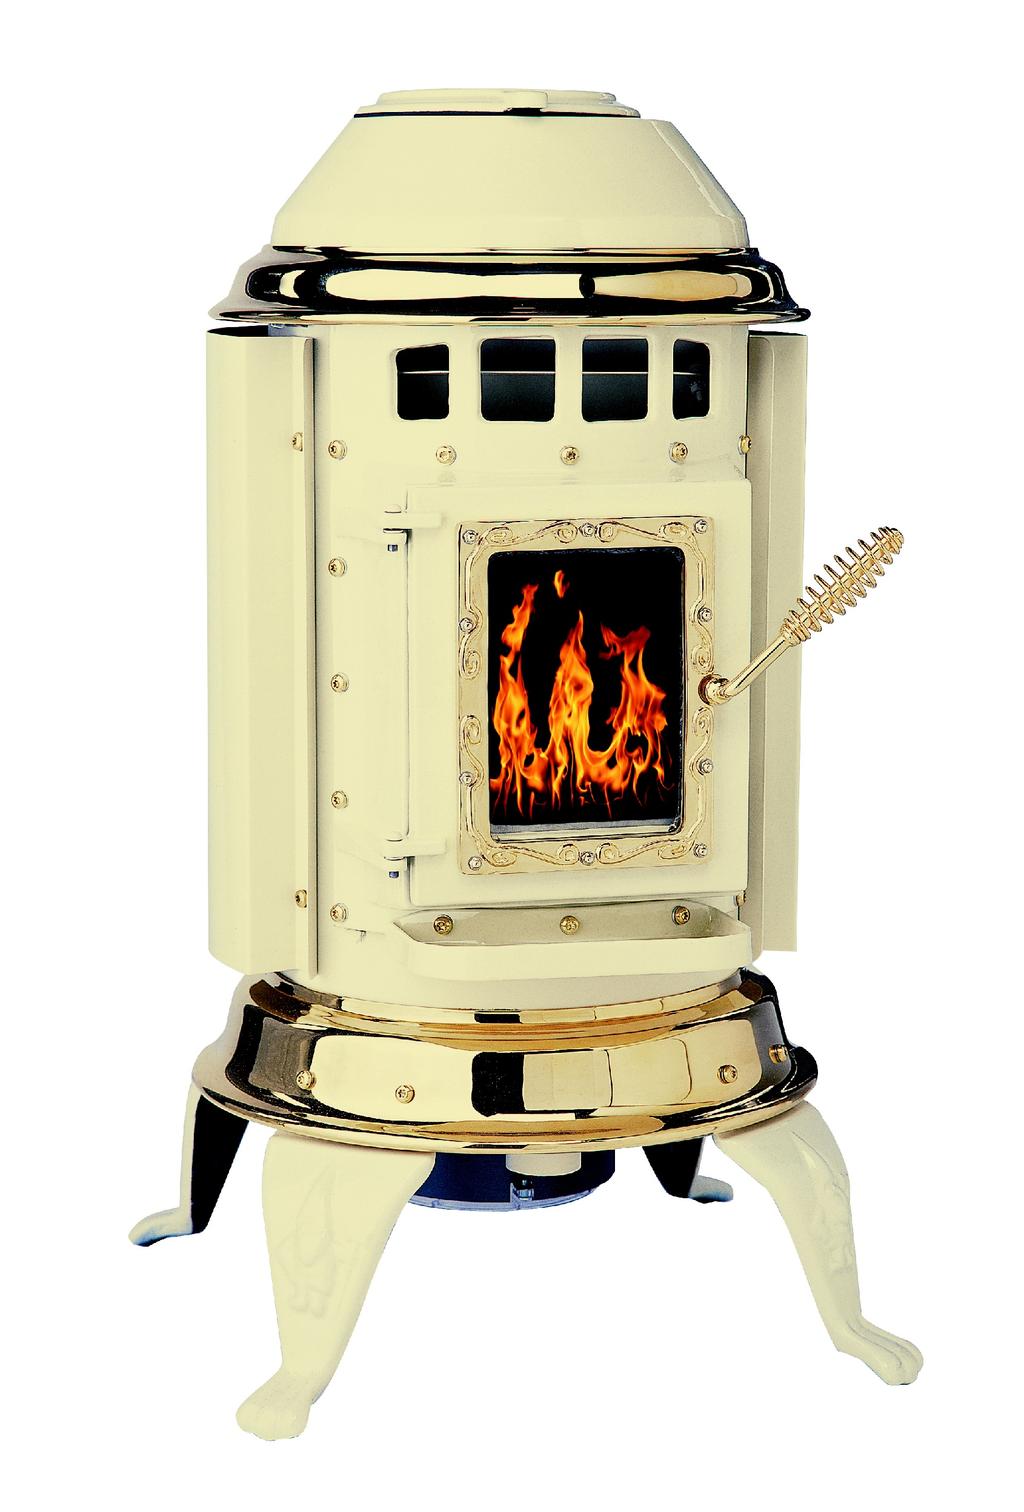 THELIN GNOME PELLET HEATER PLANNING & INSTALLATION GUIDE General Information Thelin Gnome Pellet Heaters are uniquely designed to provide a classic pot belly stove appearance while incorporating the